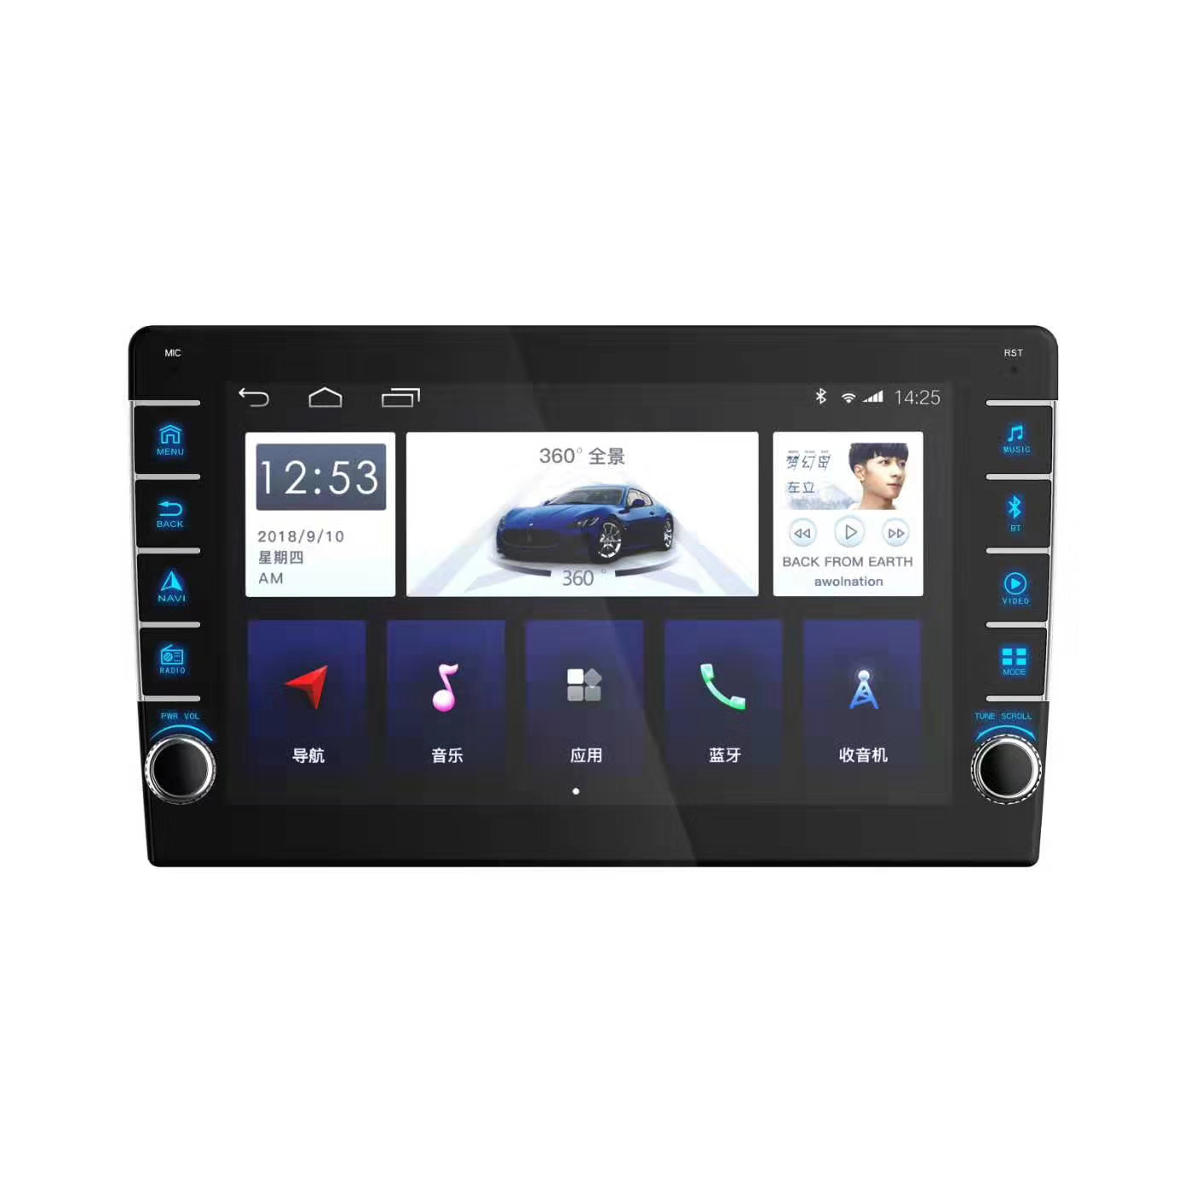 

YUEHOO 10.1 Inch 2Din for Android 8.0 Car Stereo Radio Quad Core 1+16G IPS Touch Screen MP5 Player GPS WIFI FM